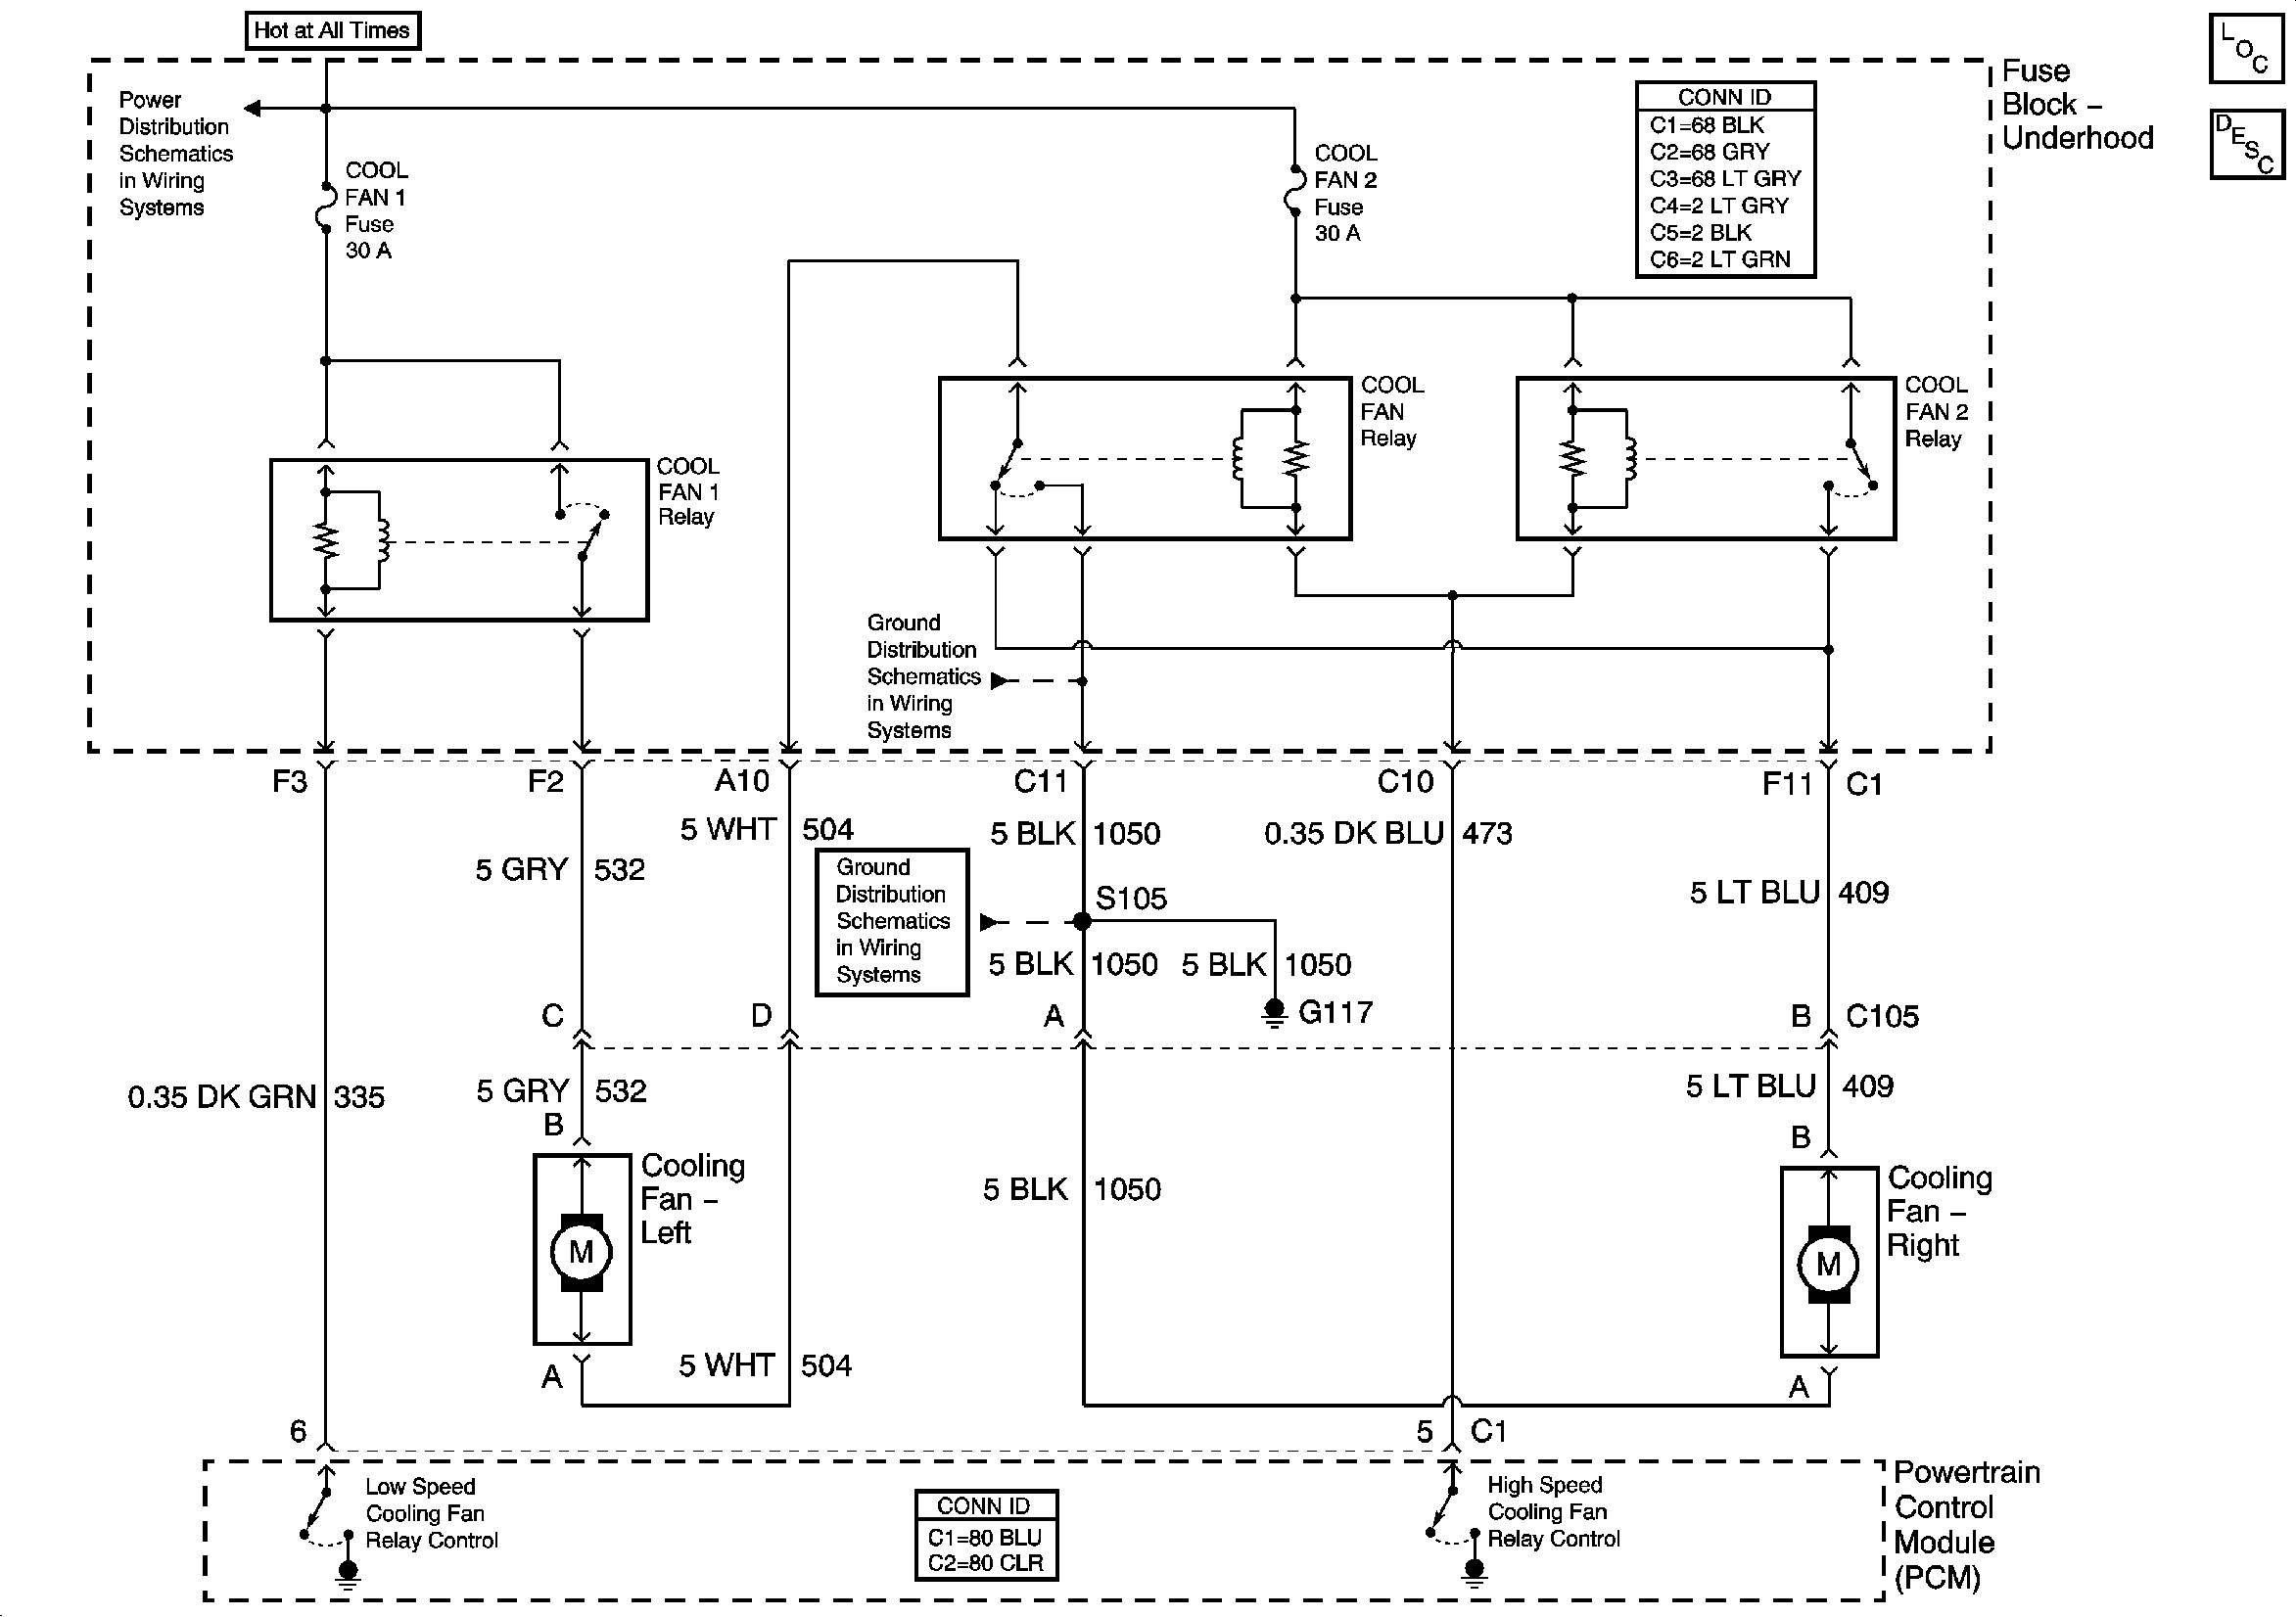 Chevy 3 4 Engine Diagram Chevy Venture Cooling Fans Wiring Diagram Chevy Free Engine Image Of Chevy 3 4 Engine Diagram